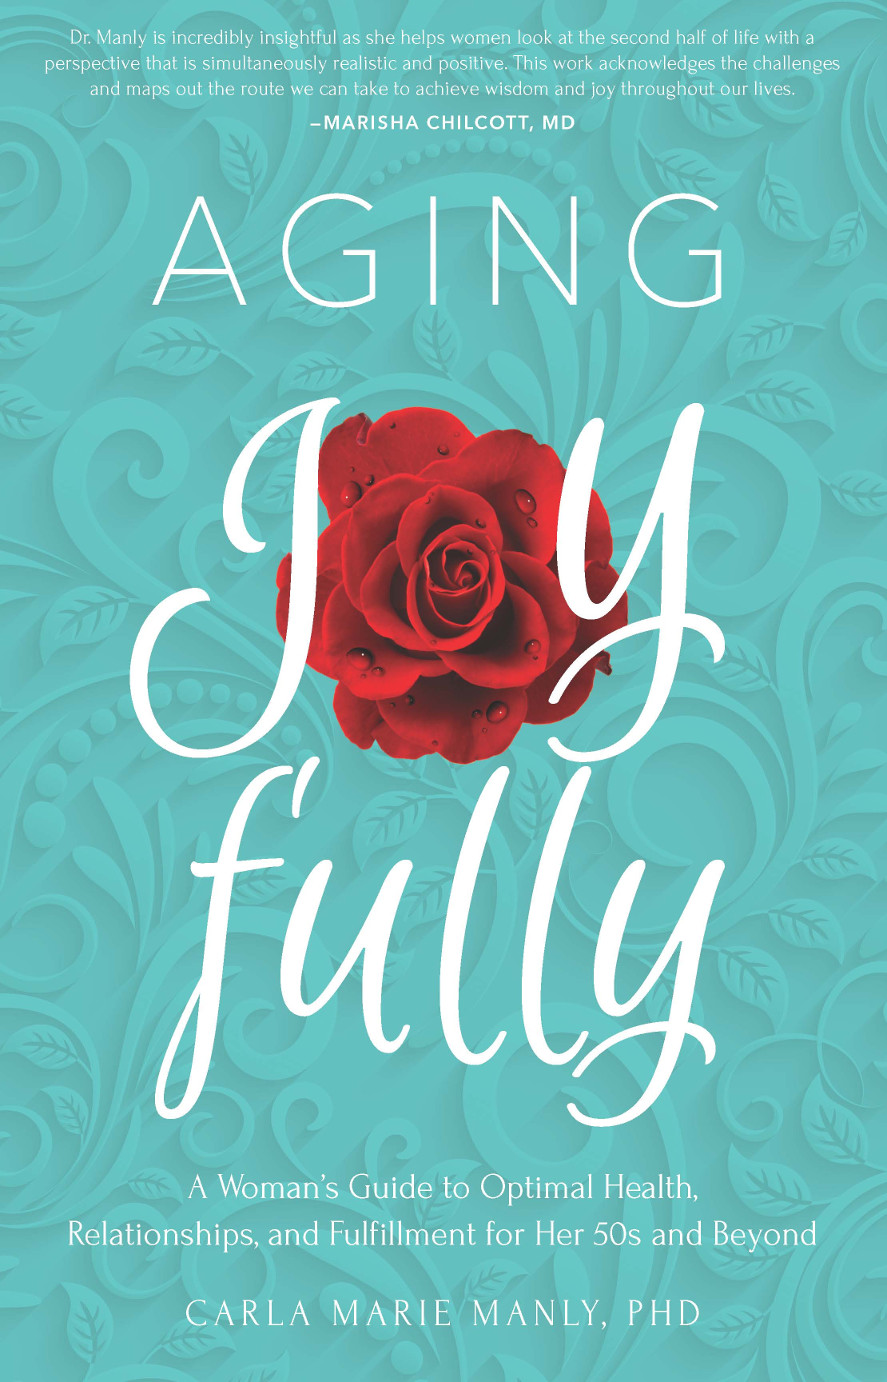 Front Cover of Aging Joyfully book